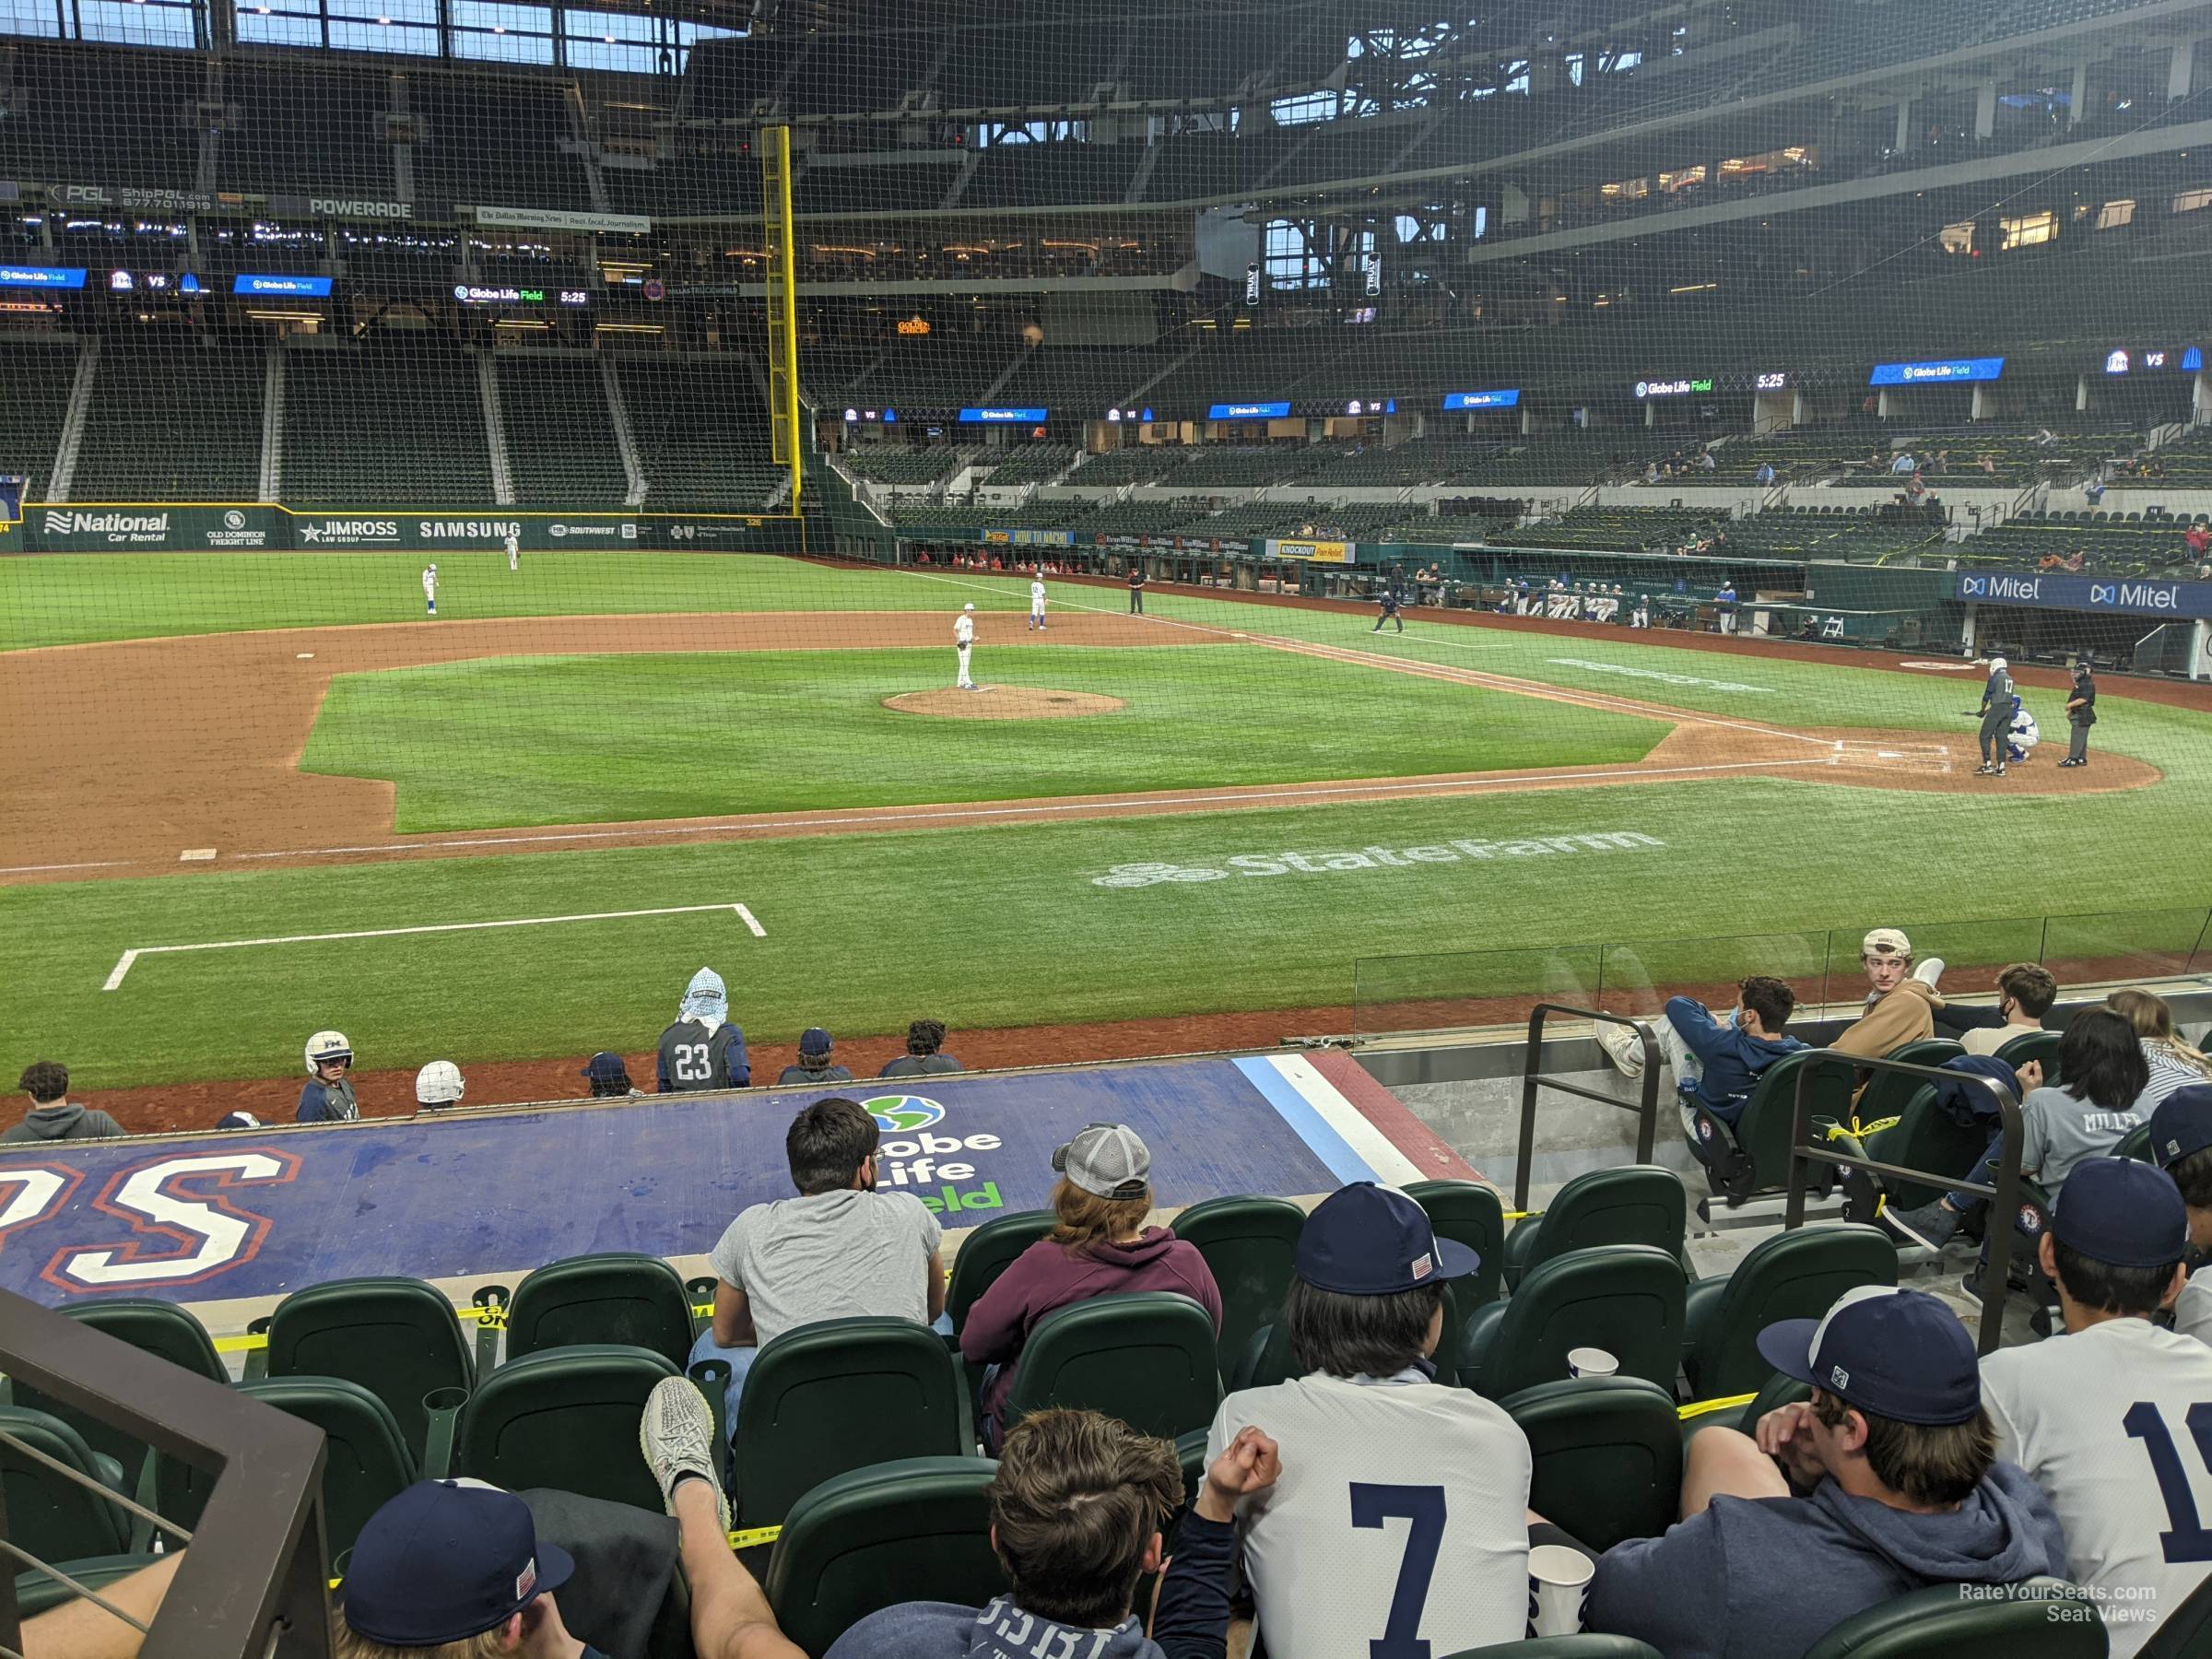 section 8, row 8 seat view  - globe life field